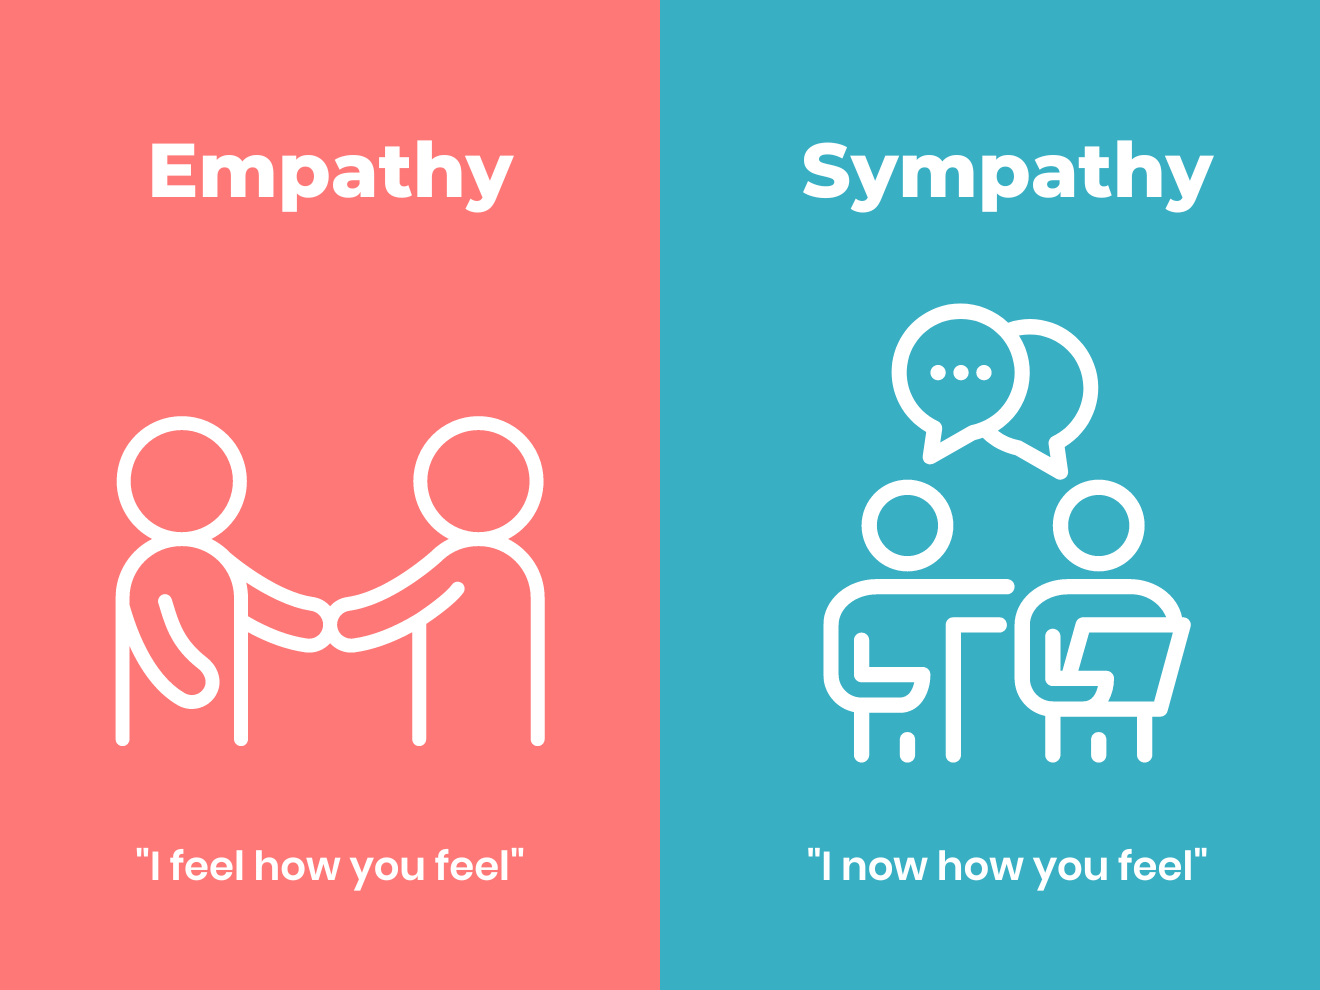 The difference between sympathy and empathy in customer service